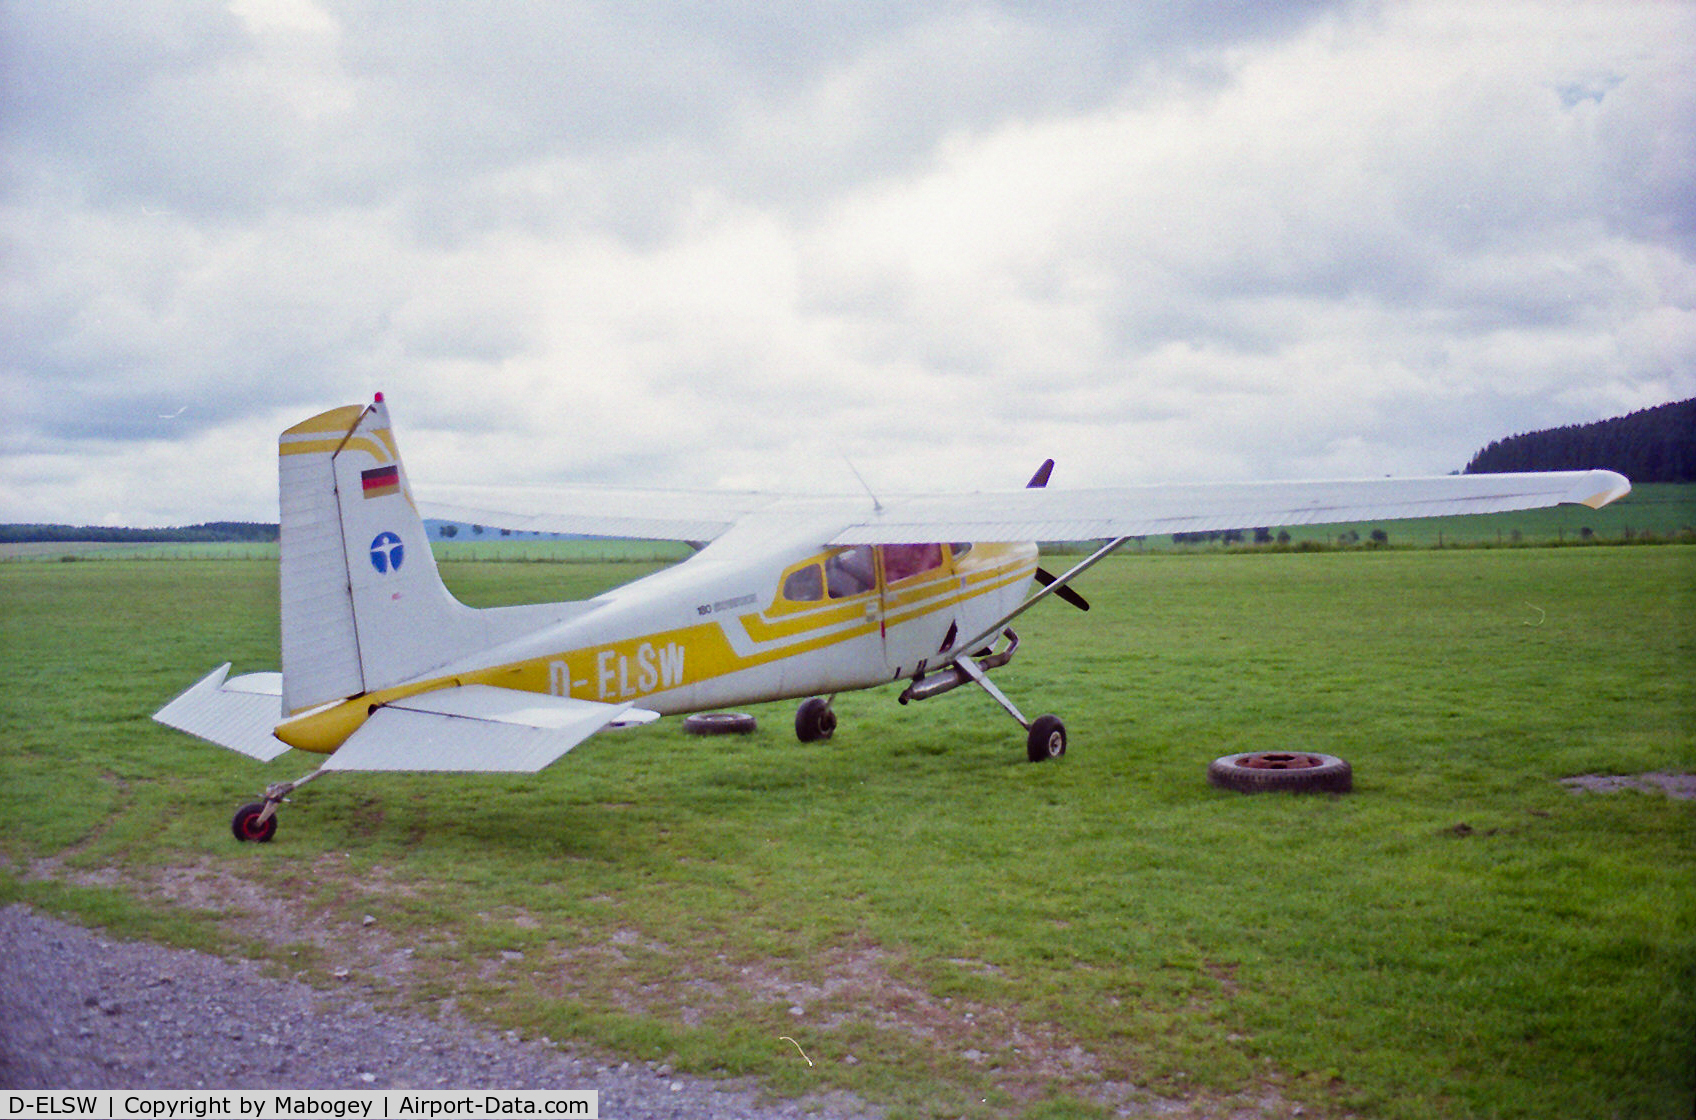 D-ELSW, 1978 Cessna 180K Skywagon Skywagon C/N 18052975, A Cessna 180K used for paradropping in Germany. (sorry, old picturescanned from negative. Can't remember wich airfield.)